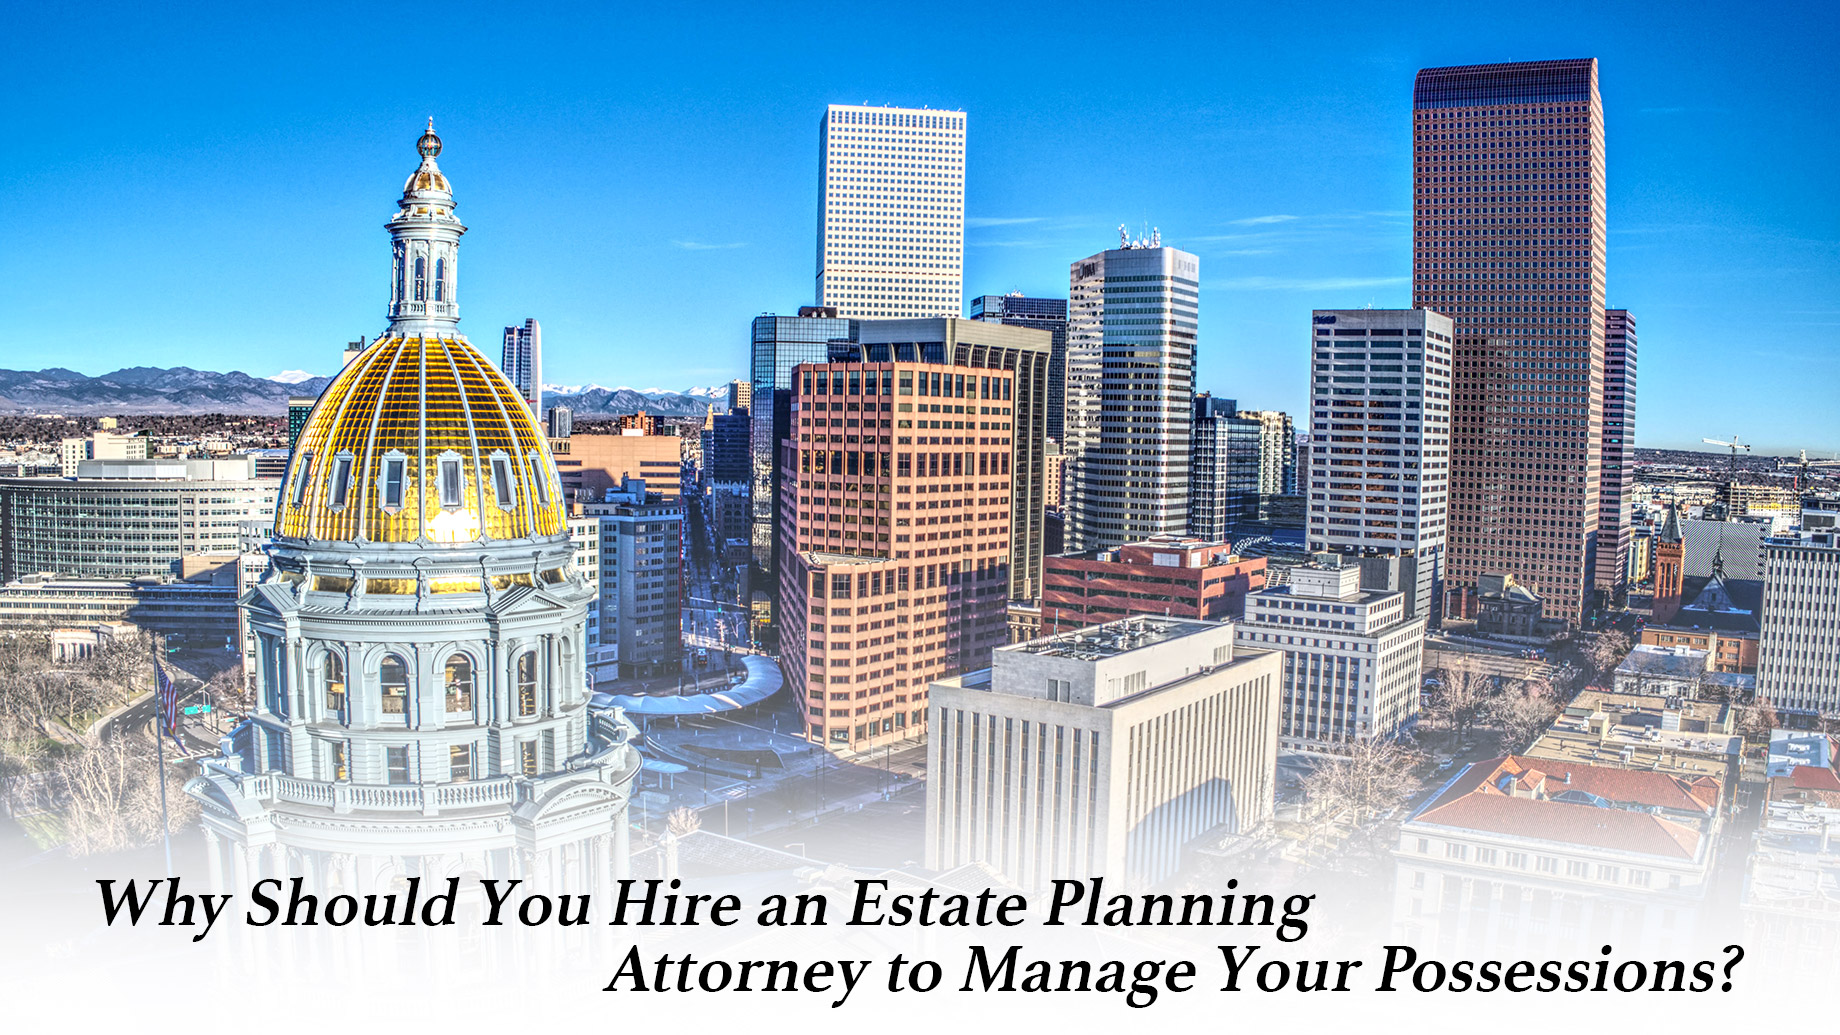 Why Should You Hire an Estate Planning Attorney to Manage Your Possessions